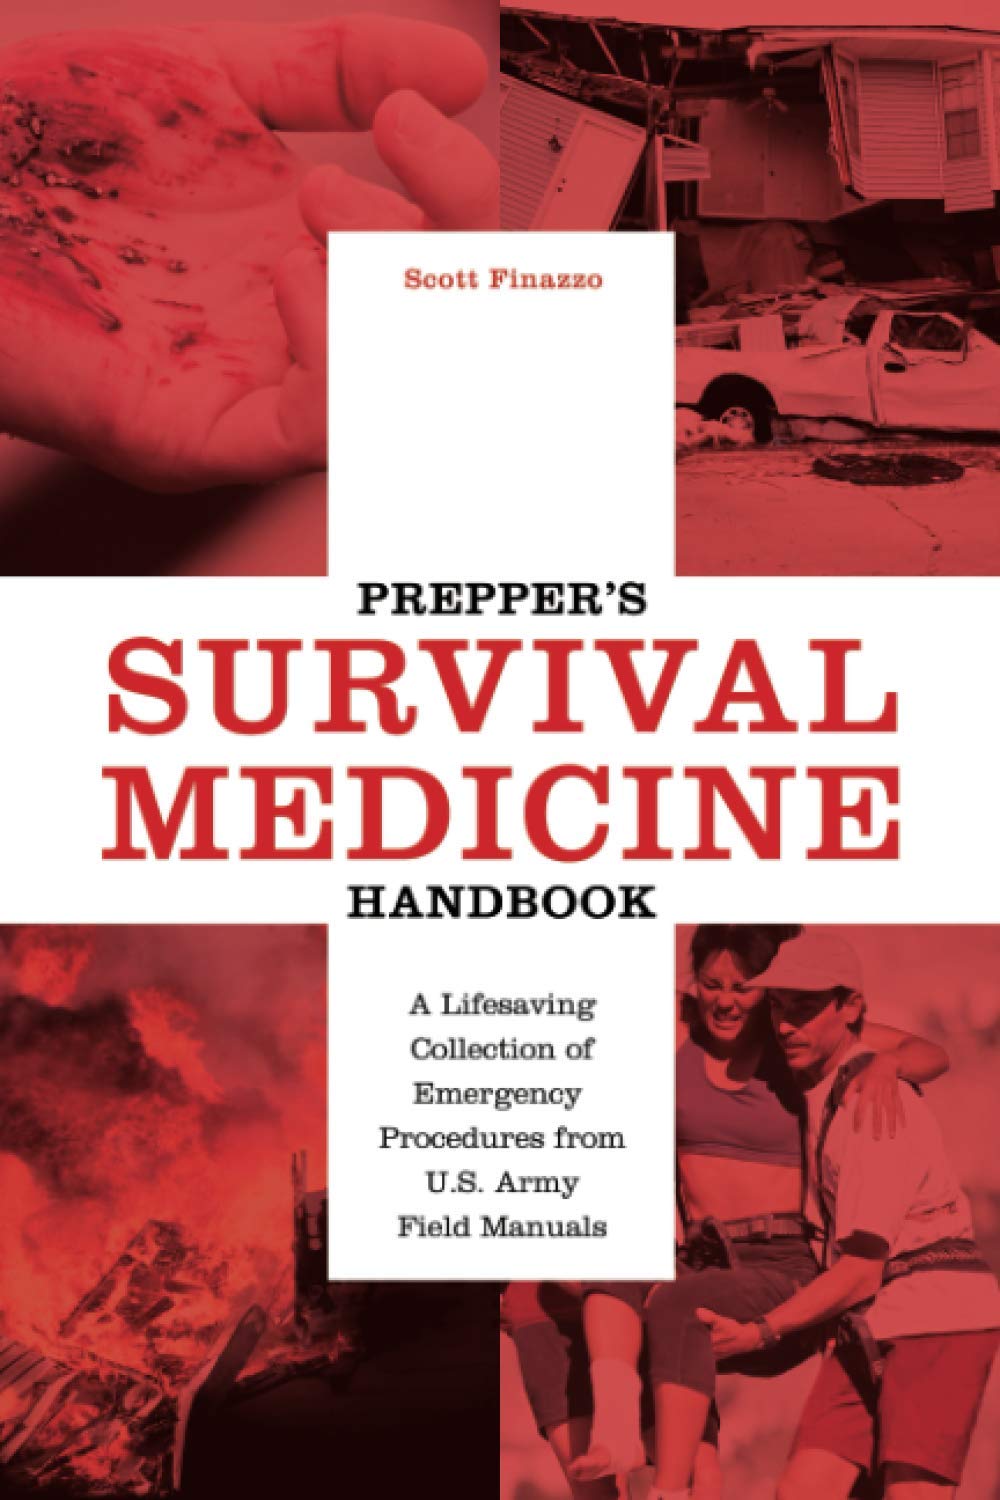 Prepper’s Survival Medicine Handbook: A Lifesaving Collection of Emergency Procedures from U.S. Army Field Manuals